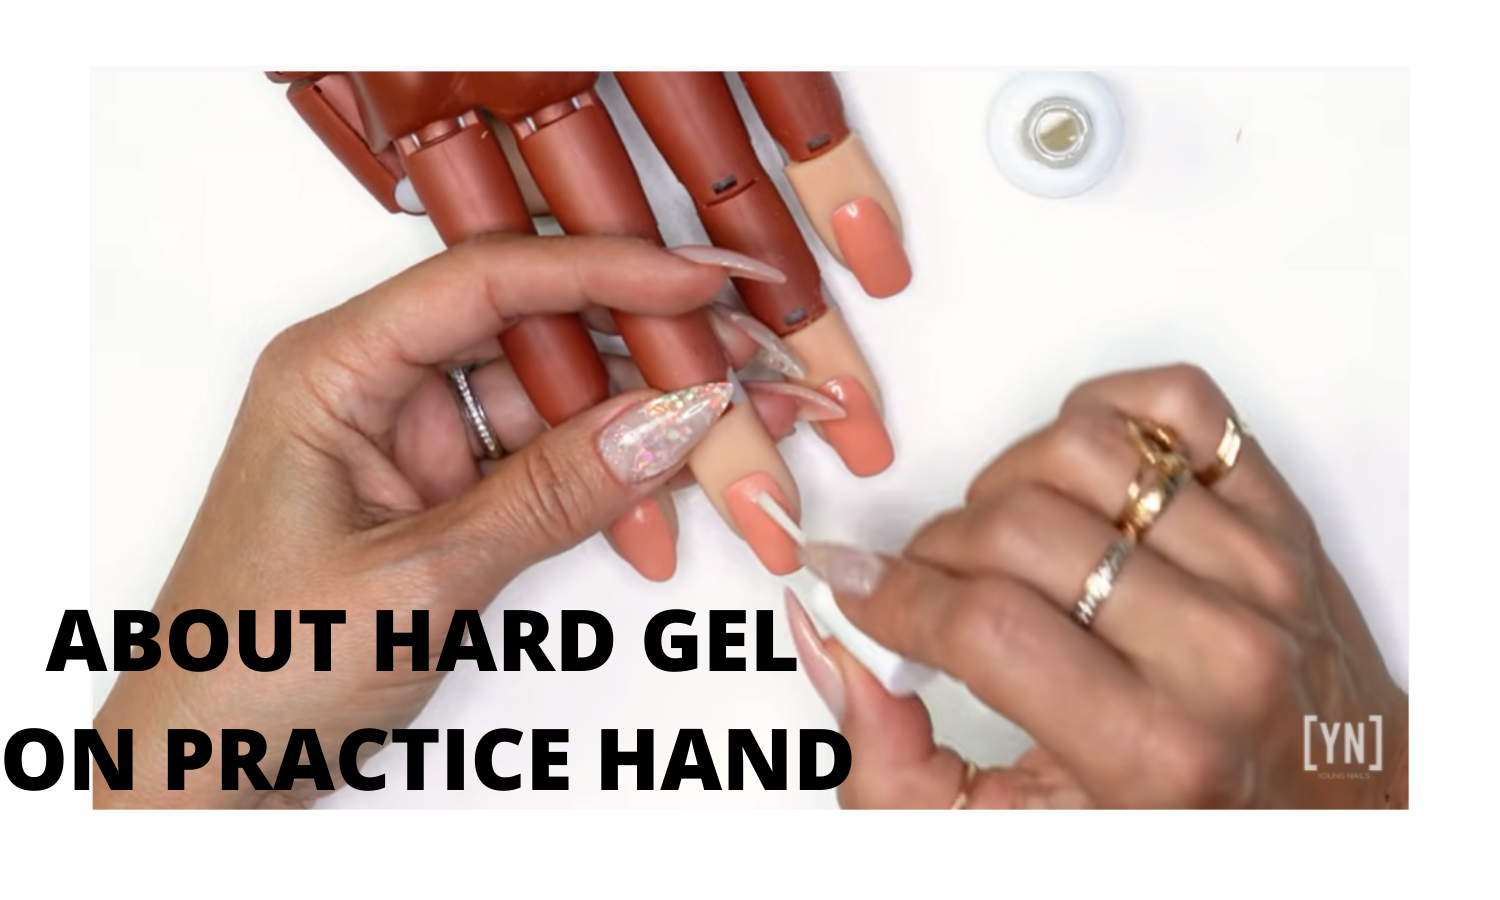 ABOUT HARD GEL ON PRACTICE HAND